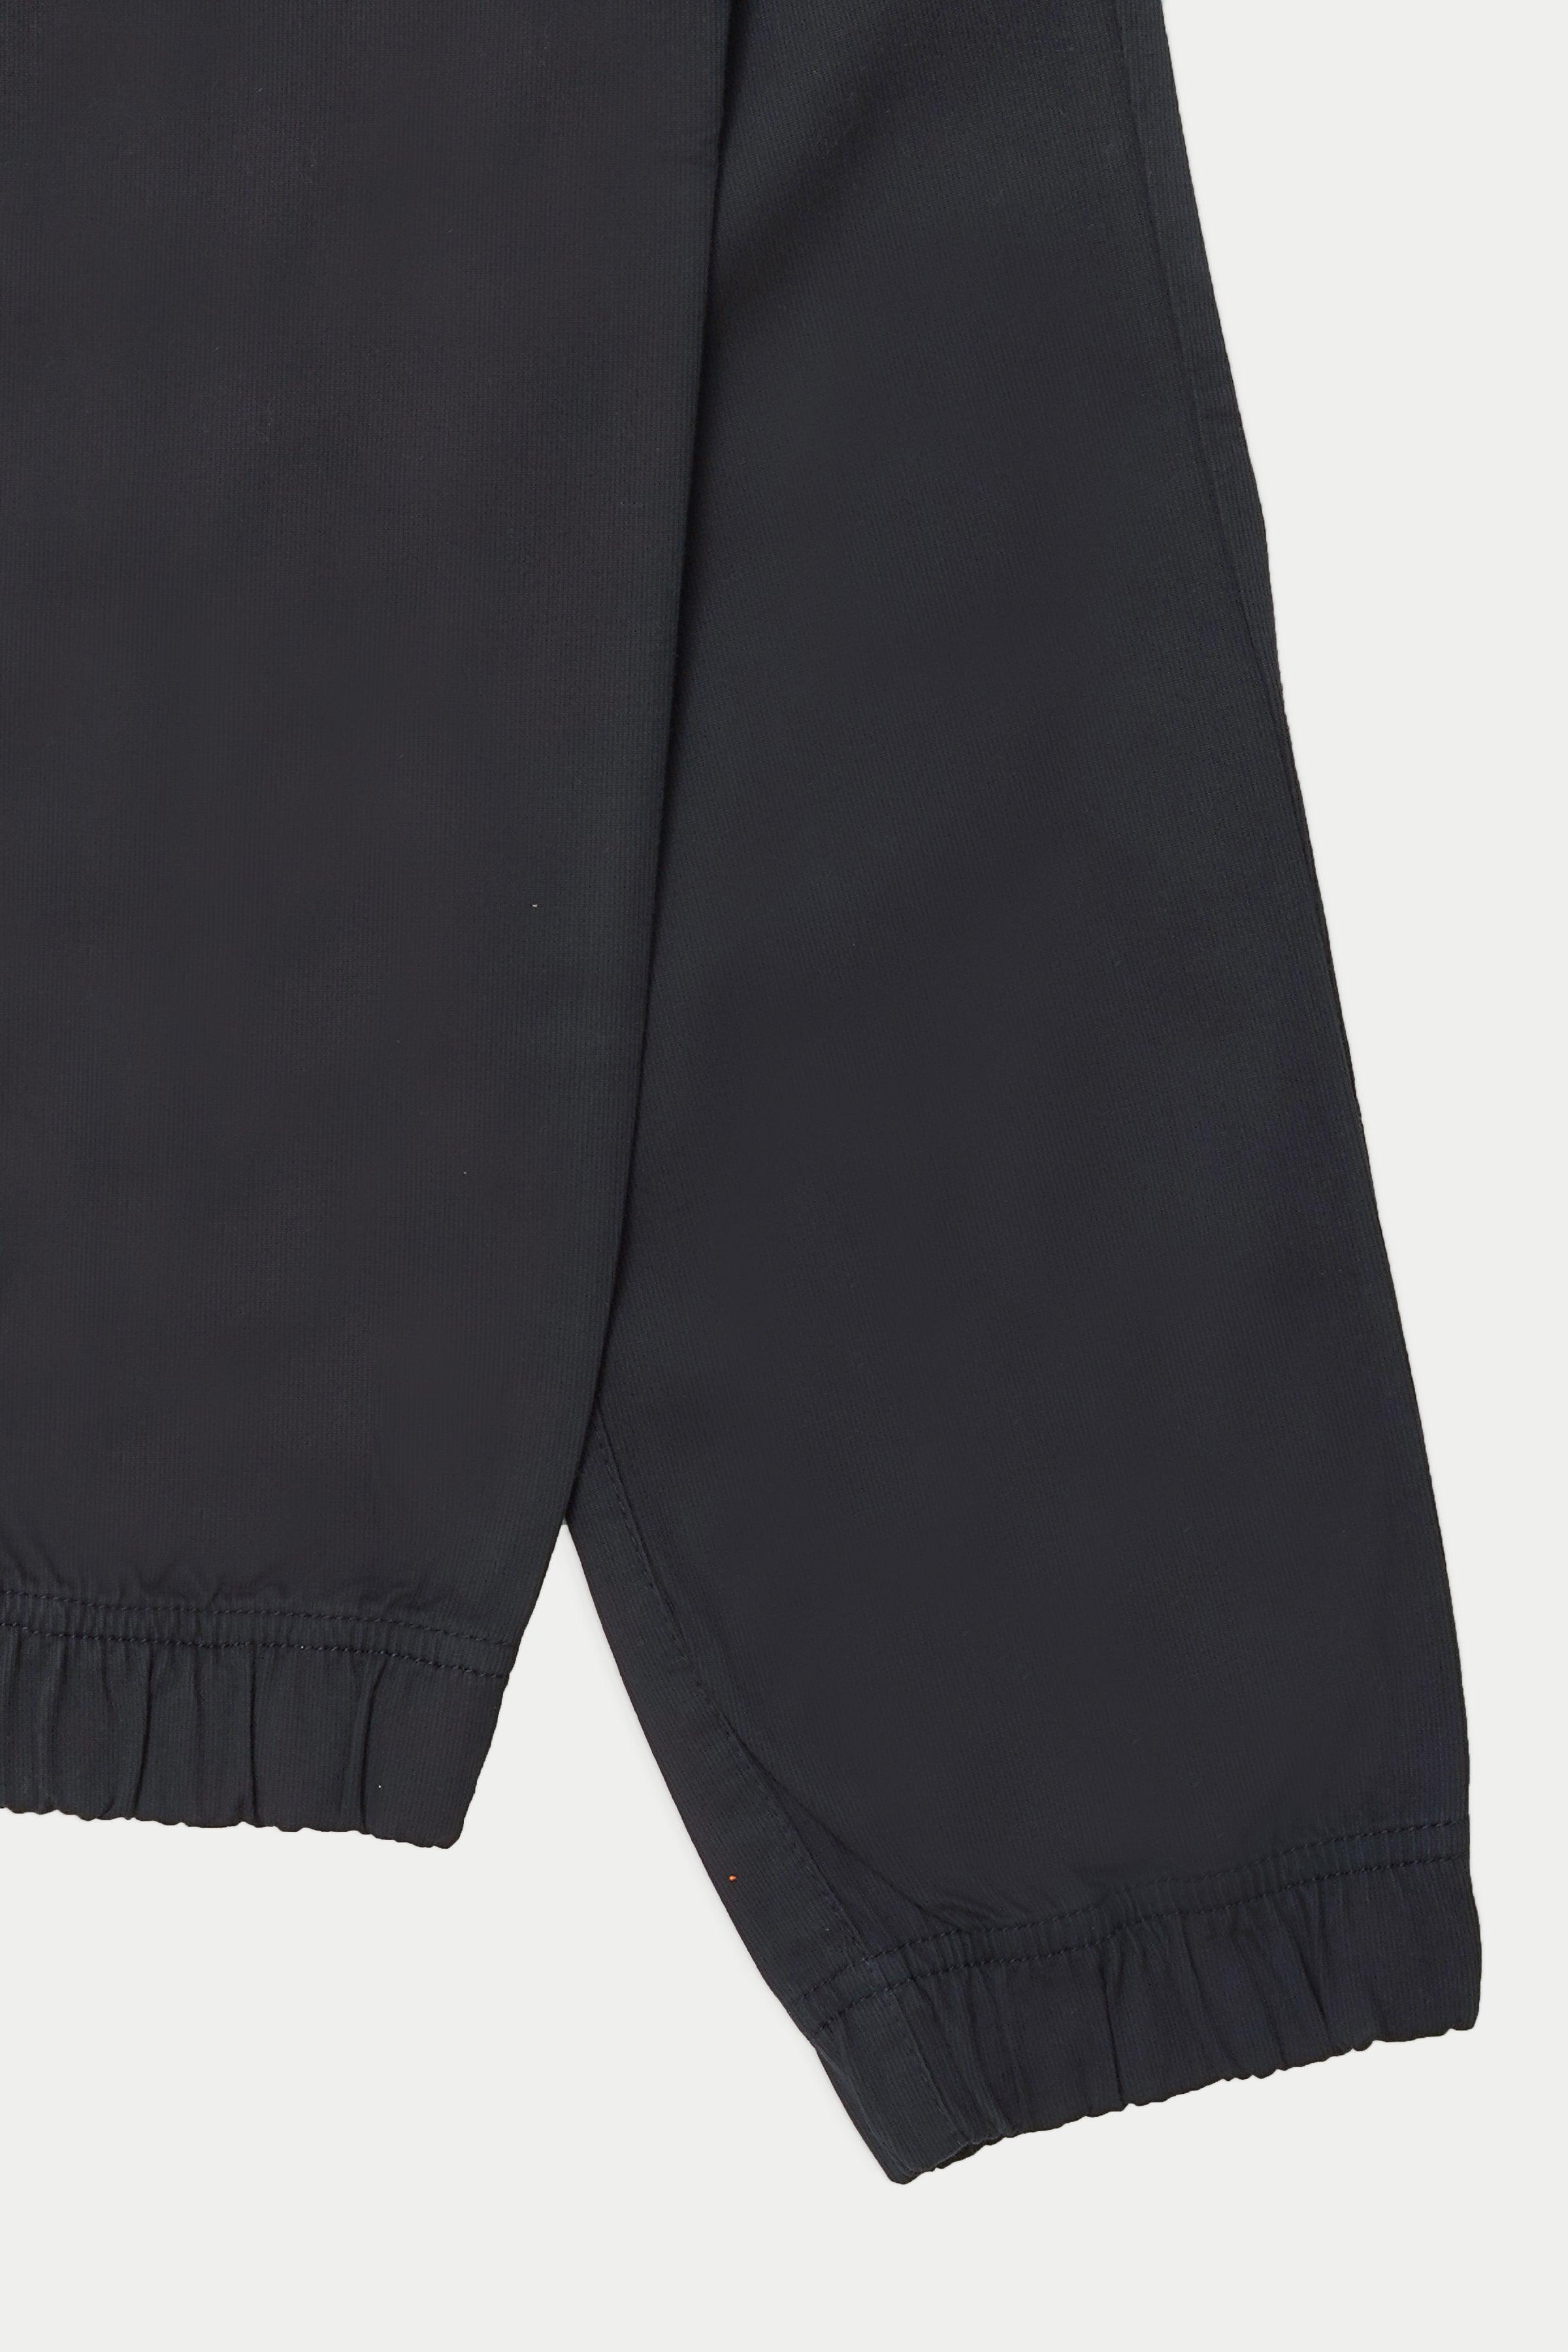 CARGO TROUSER NAVY at Charcoal Clothing